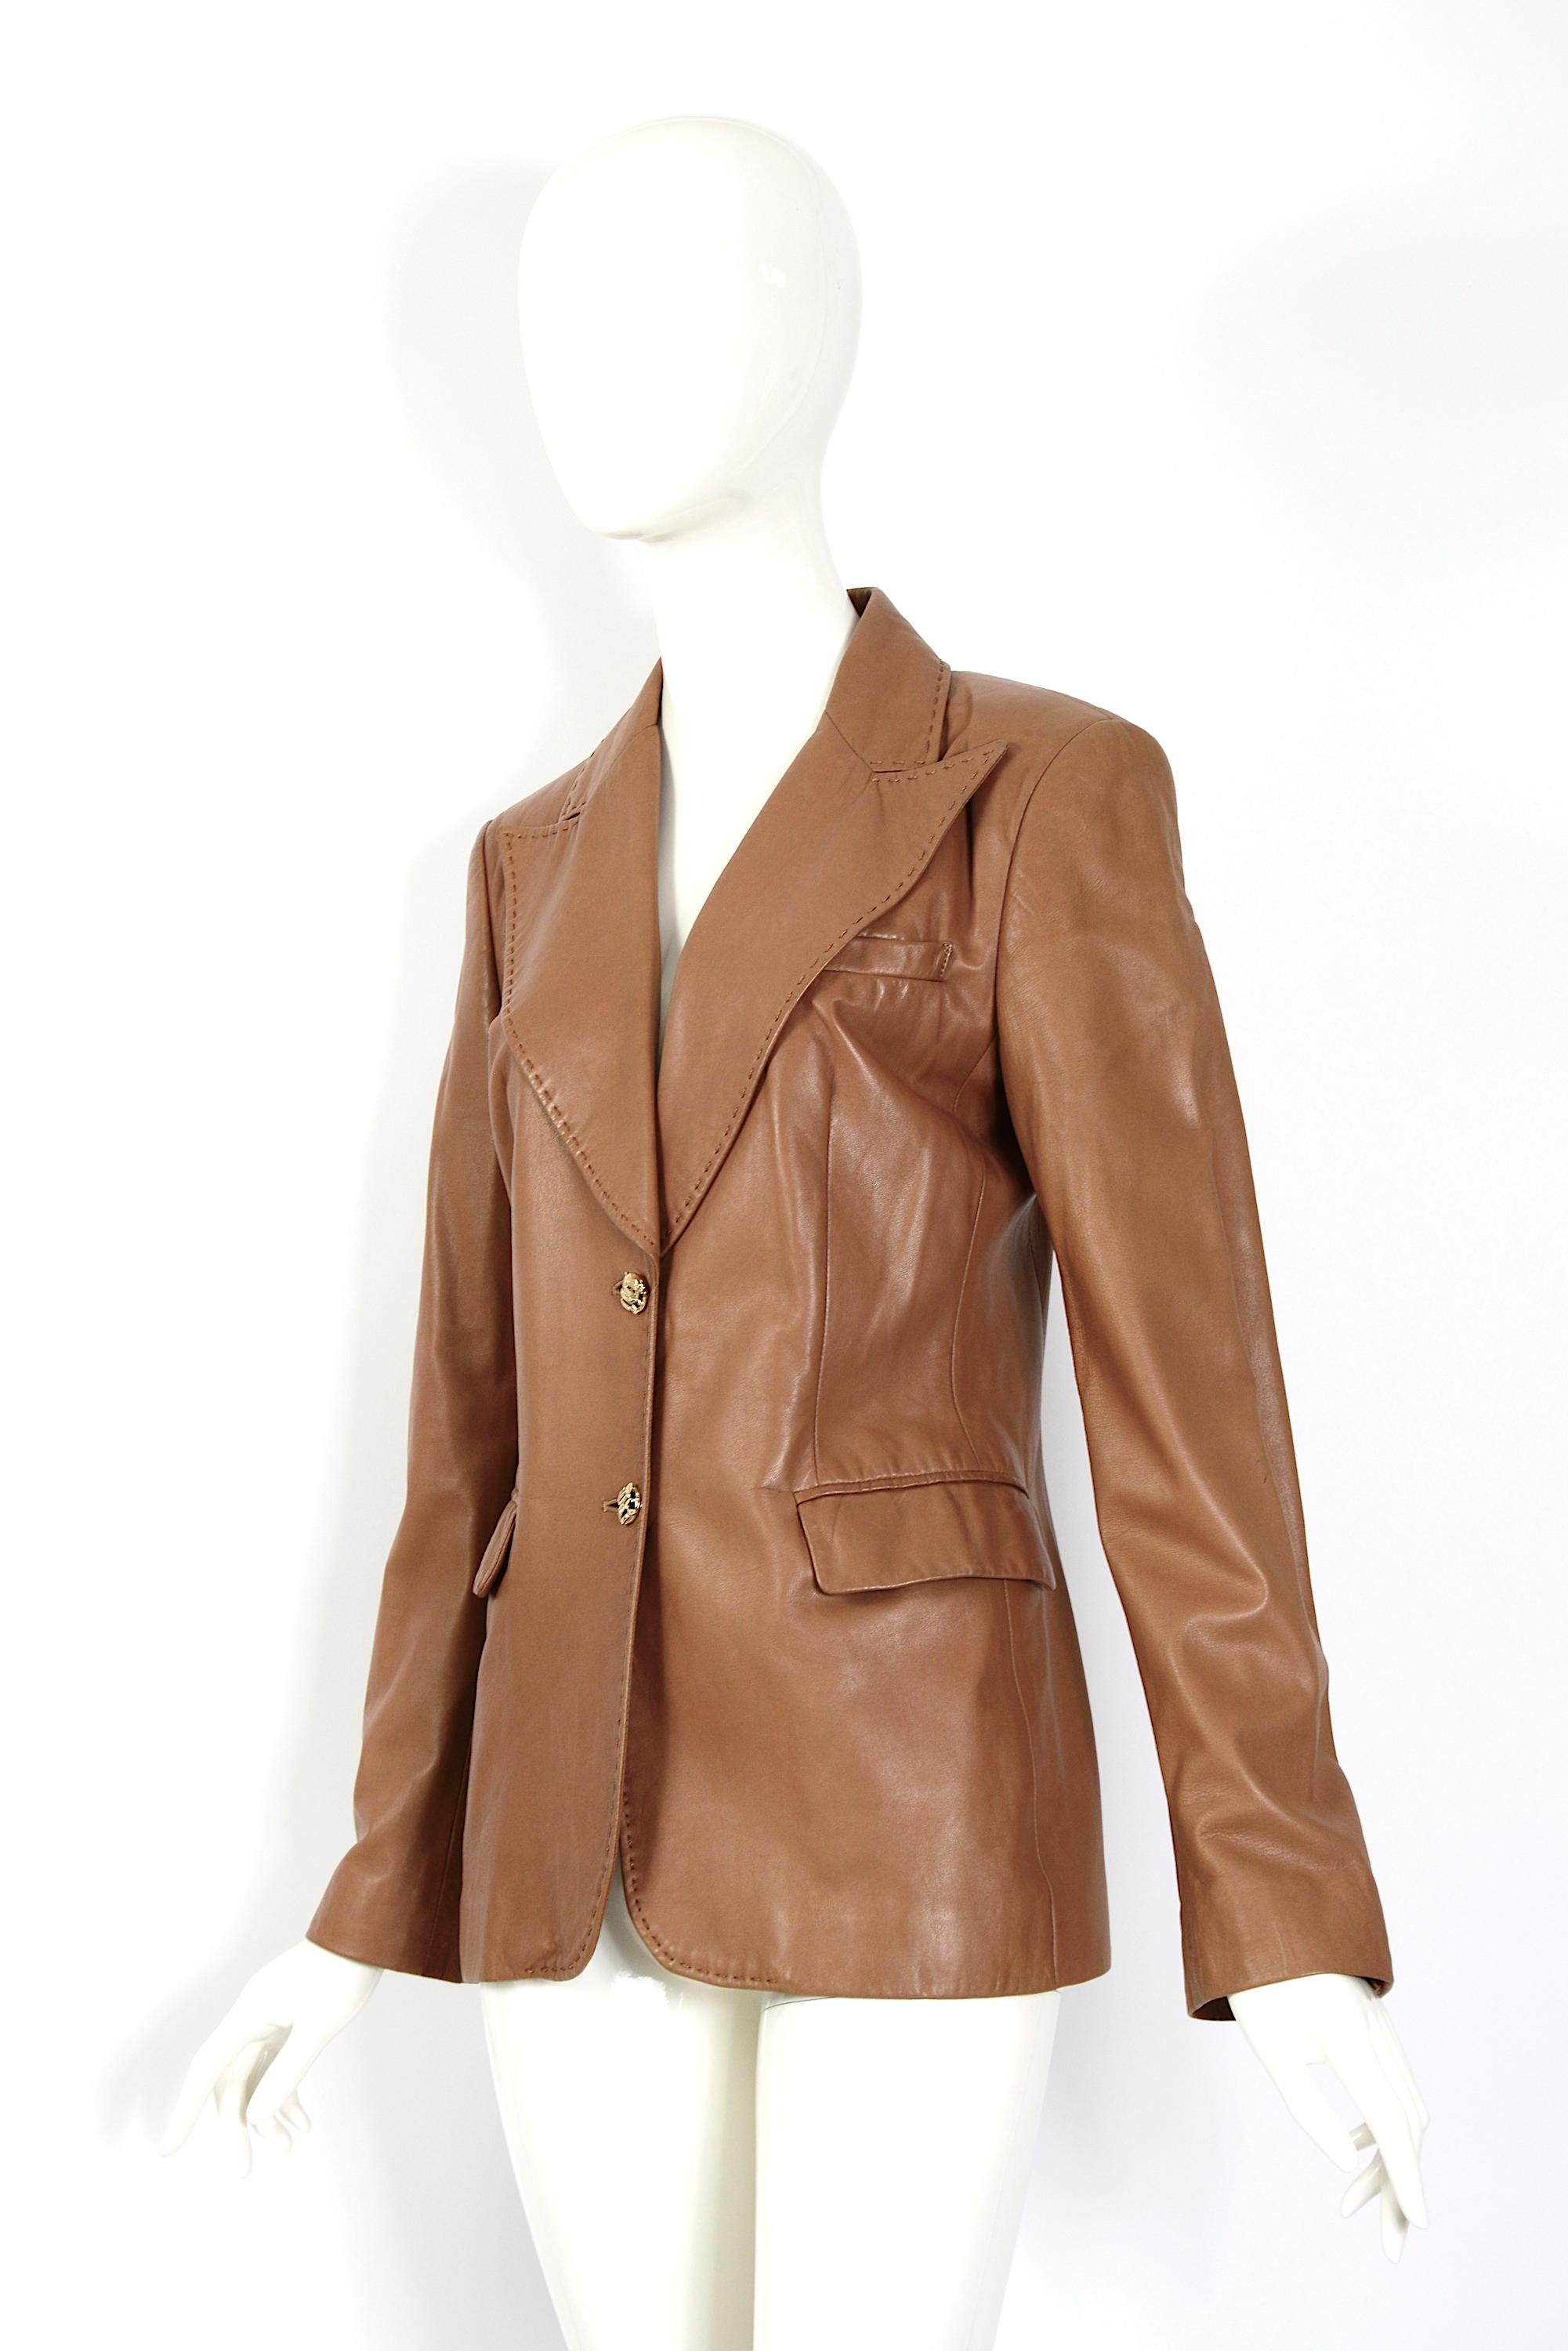 Vintage 1990s Gianni Versace timeless camel soft leather jacket in the most beautiful condition. 
This jacket is a dream. As good as it looks in the photos it is even better in person. The photos don't convey how soft the leather fabric